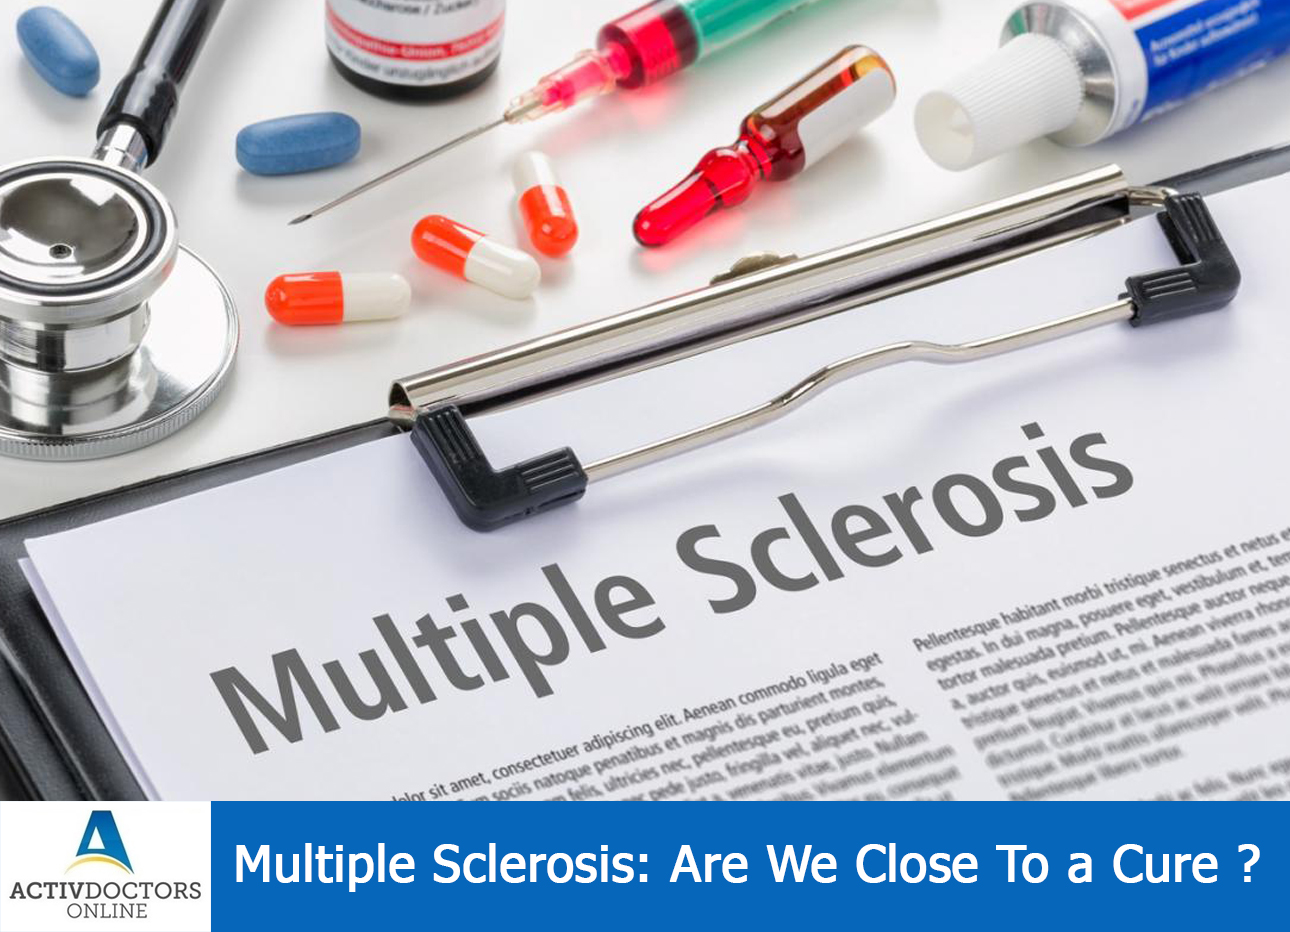 Multiple Sclerosis: Are We Close To a Cure